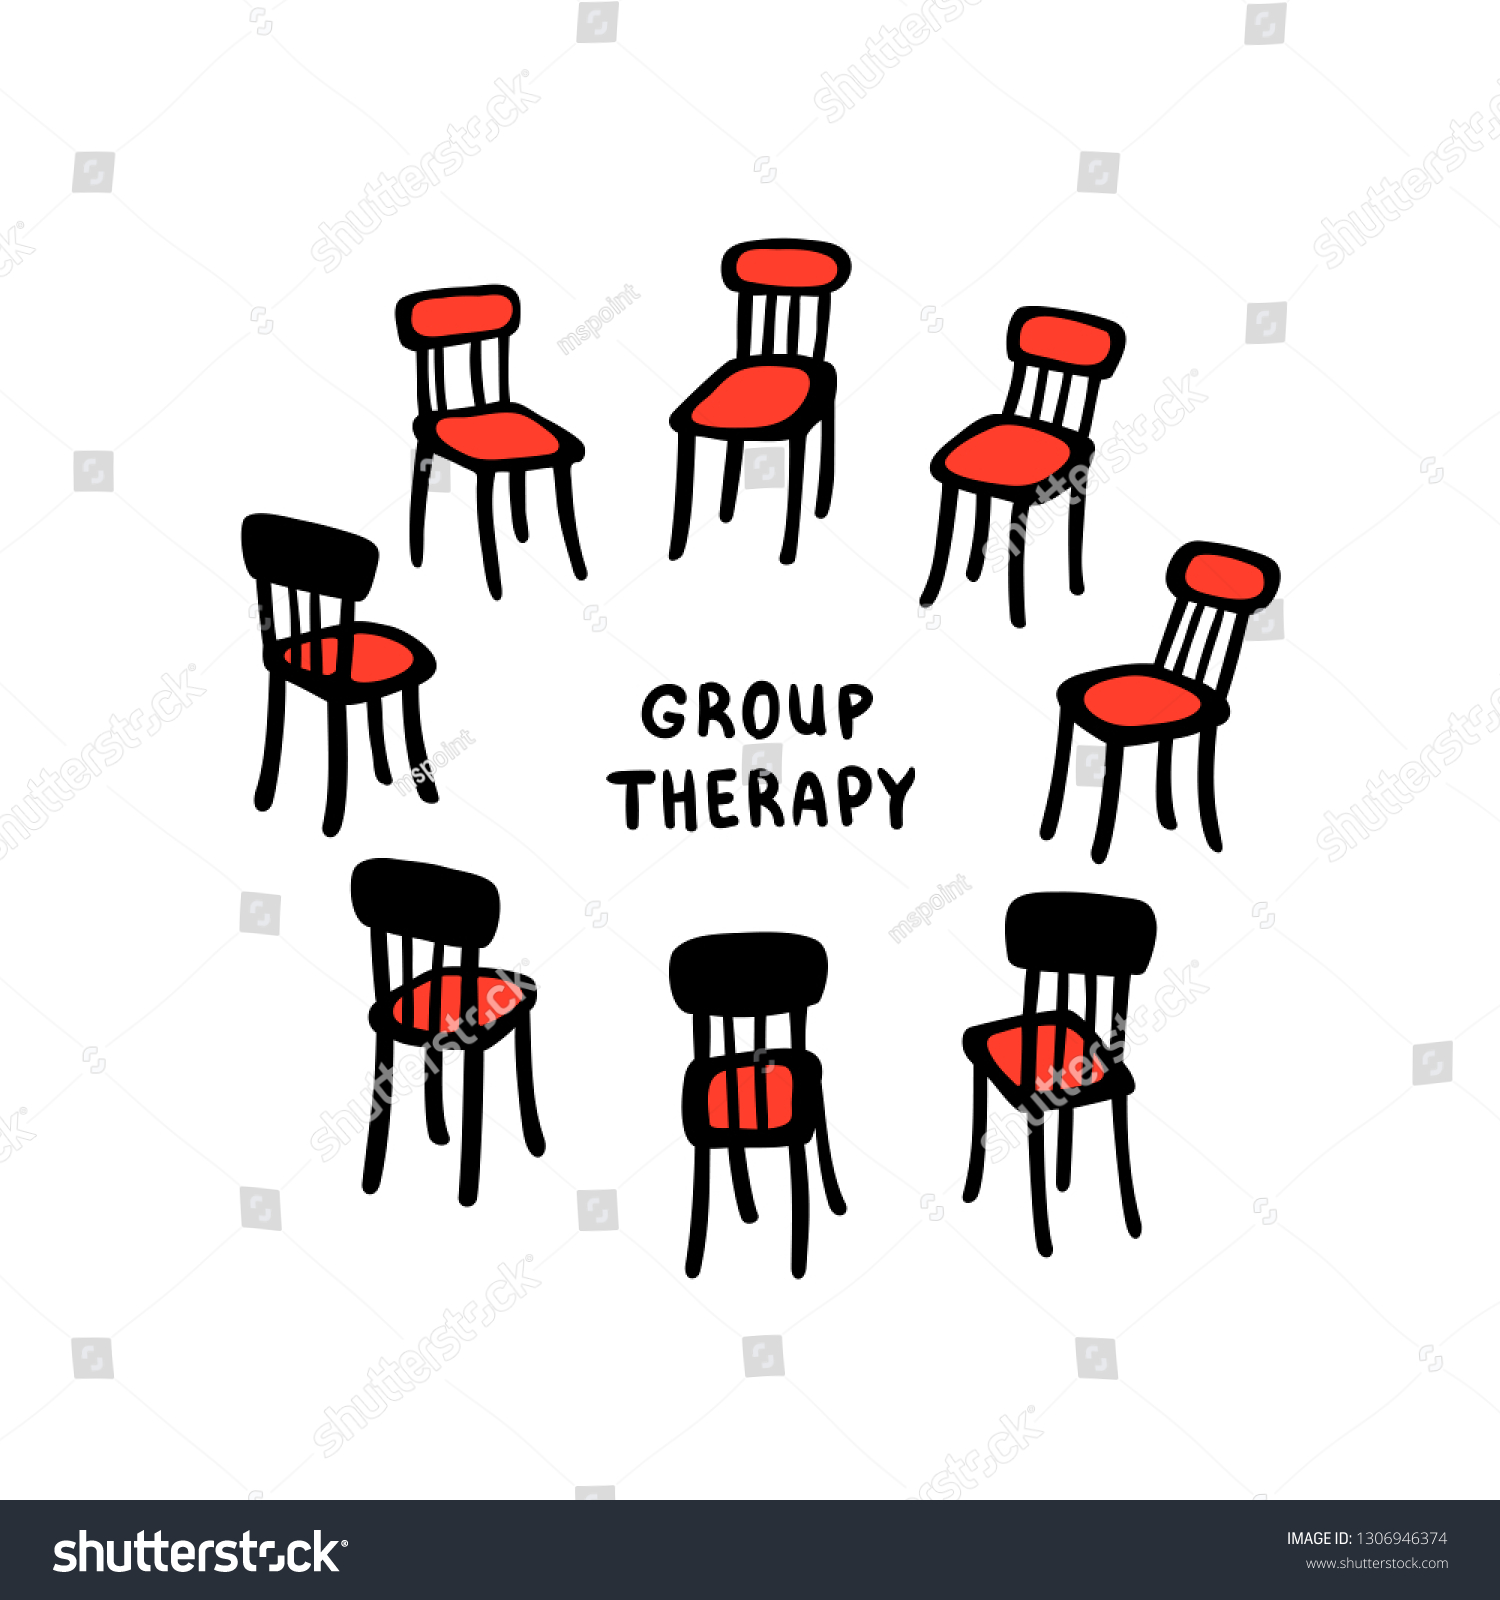 SVG of Psychology. Group therapy. Hand drawn chairs arranged in a circle. Group suuport for people suffering psychology disorders and addictions. Doodle slyle flat vector illustration svg